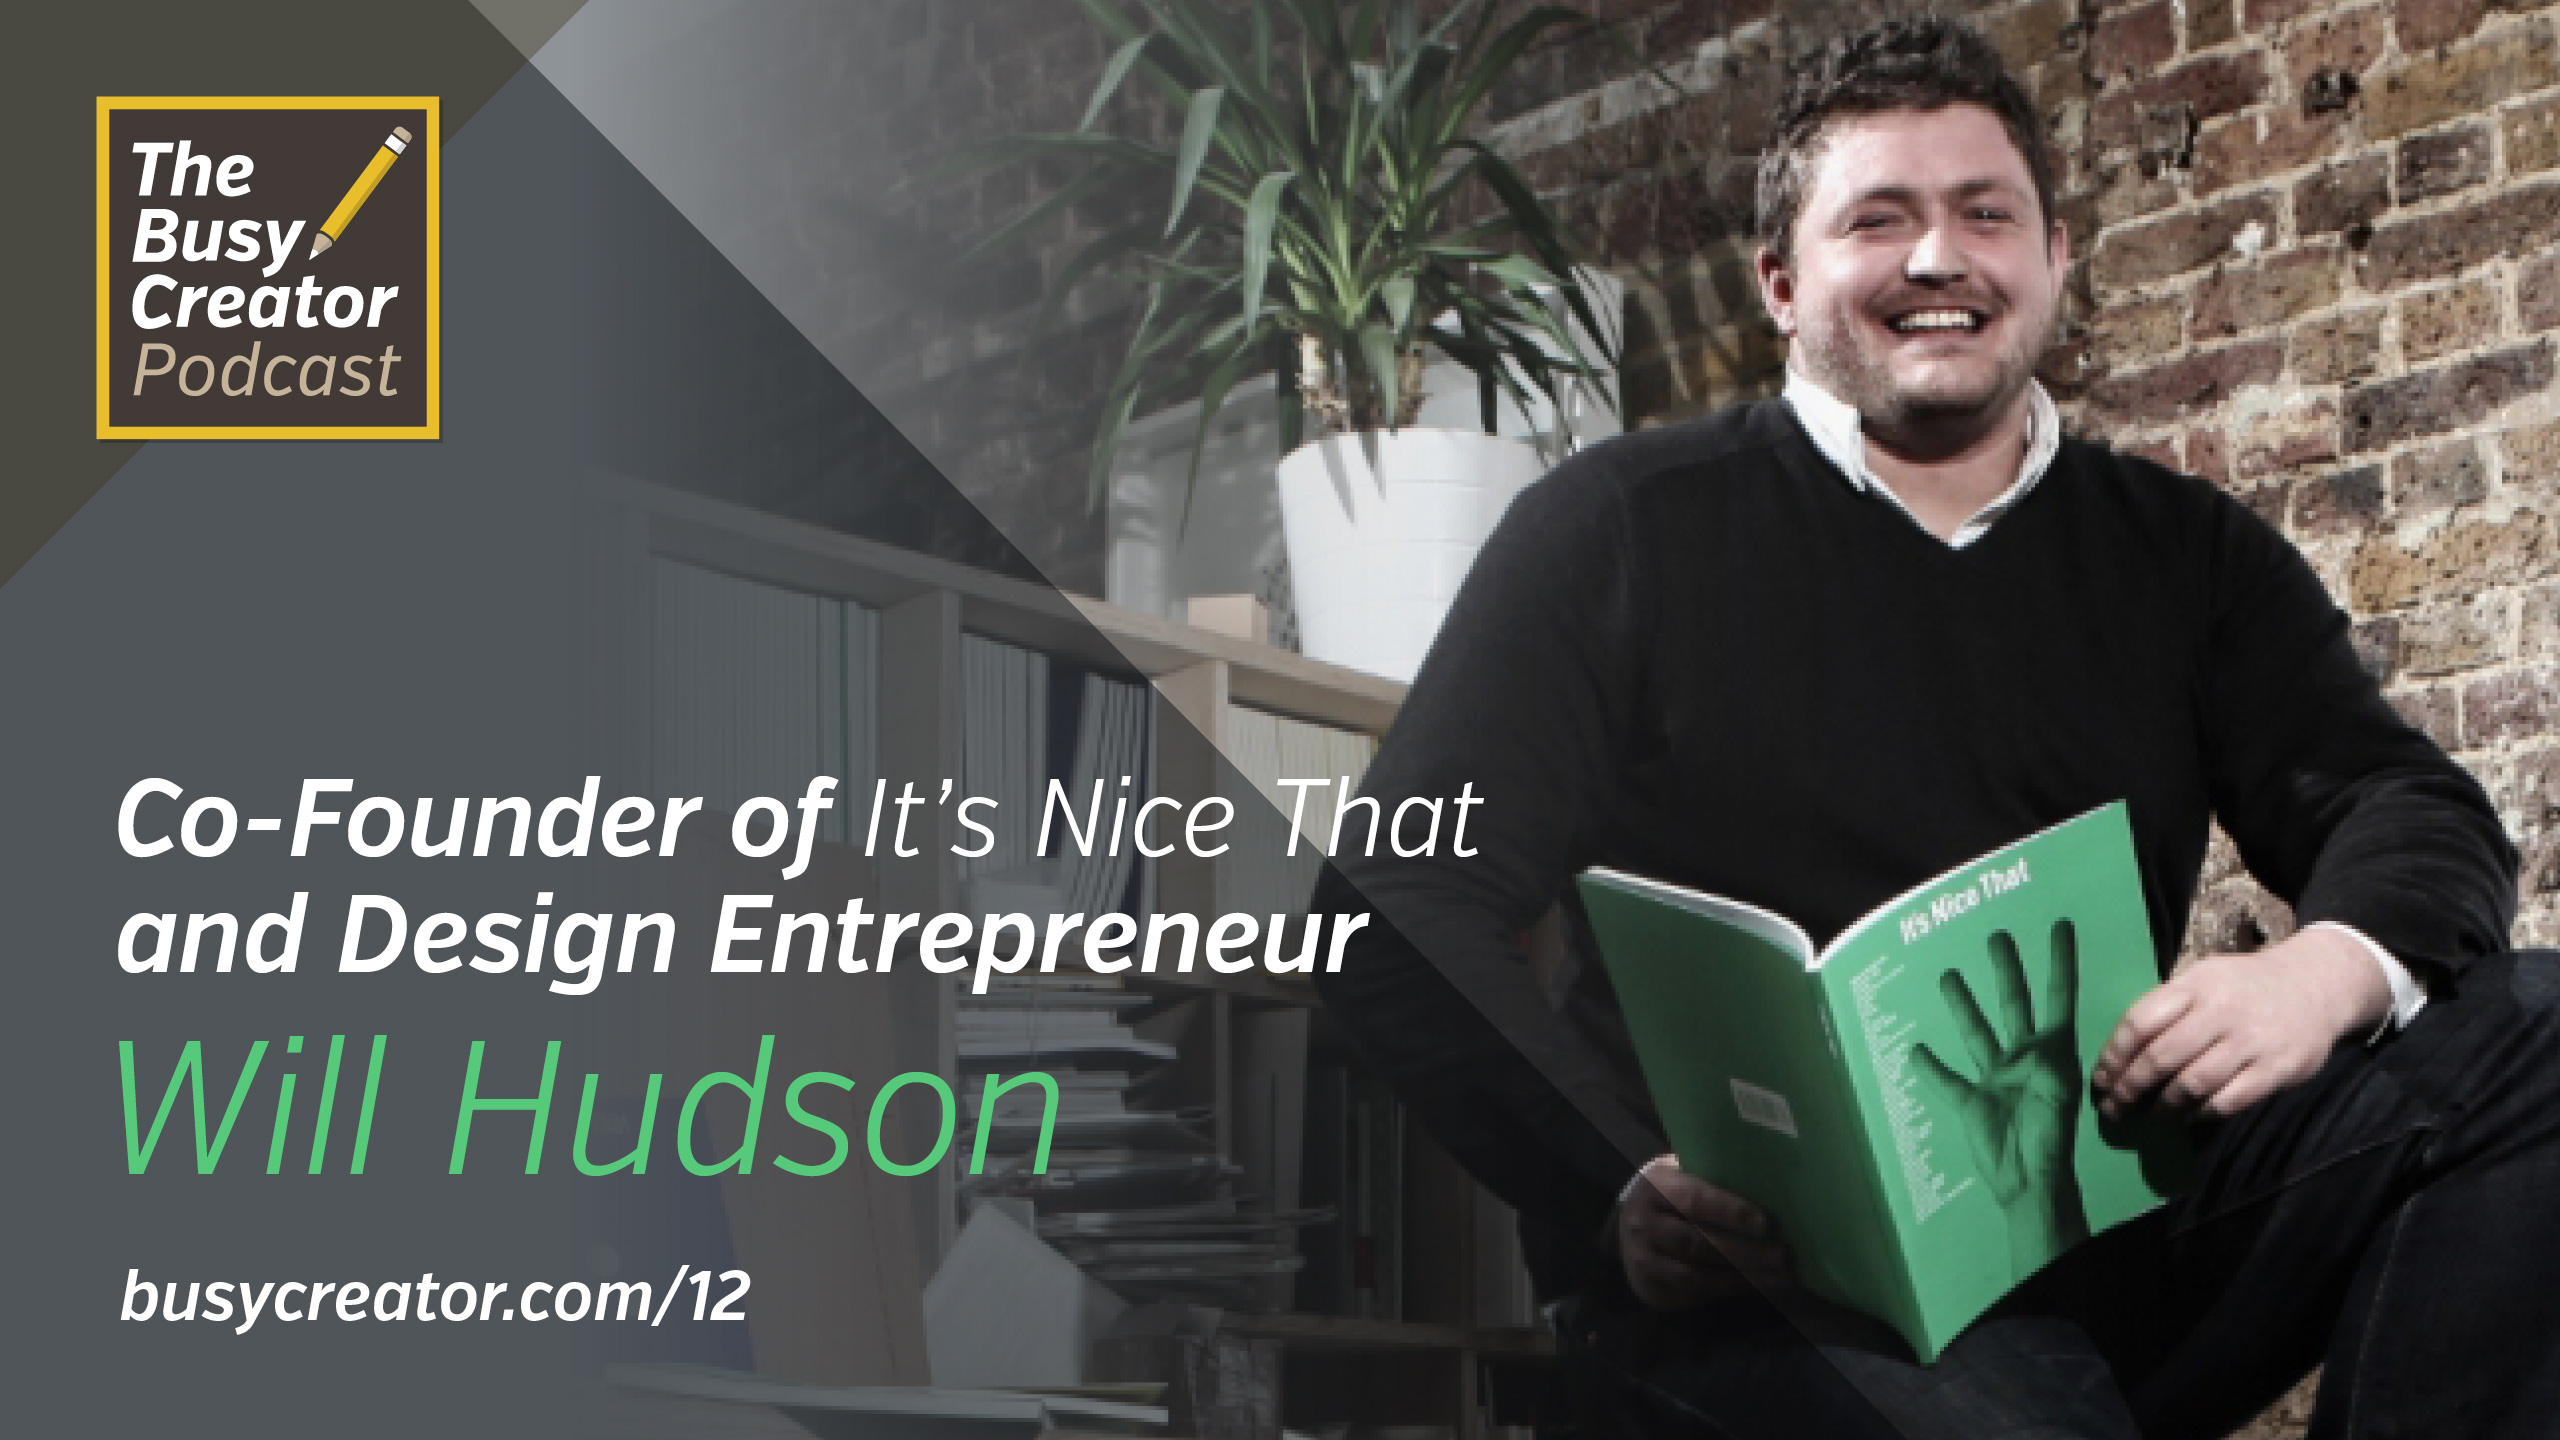 How Will Hudson Balances Publishing with Managing, and Challenges of Running ‘It’s Nice That’